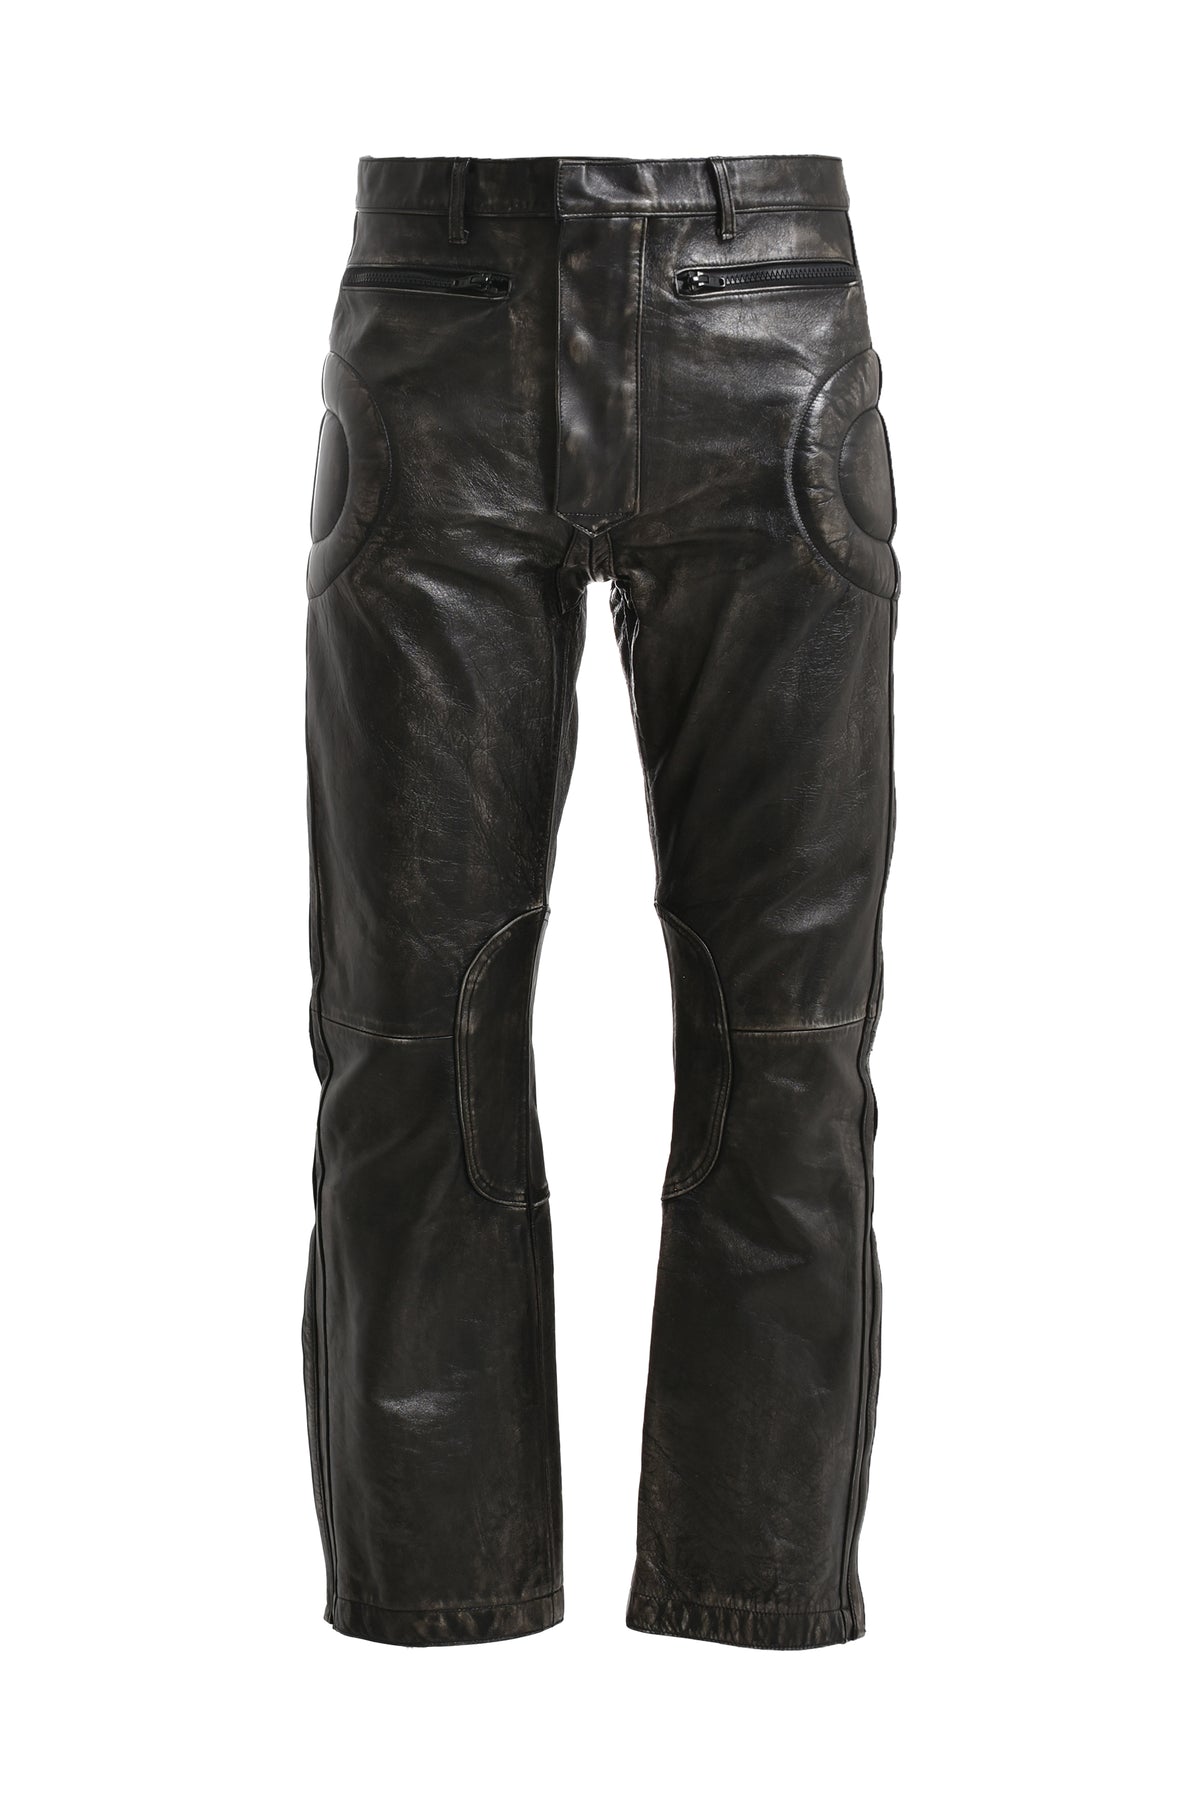 READYMADE LEATHER PANTS / BLK